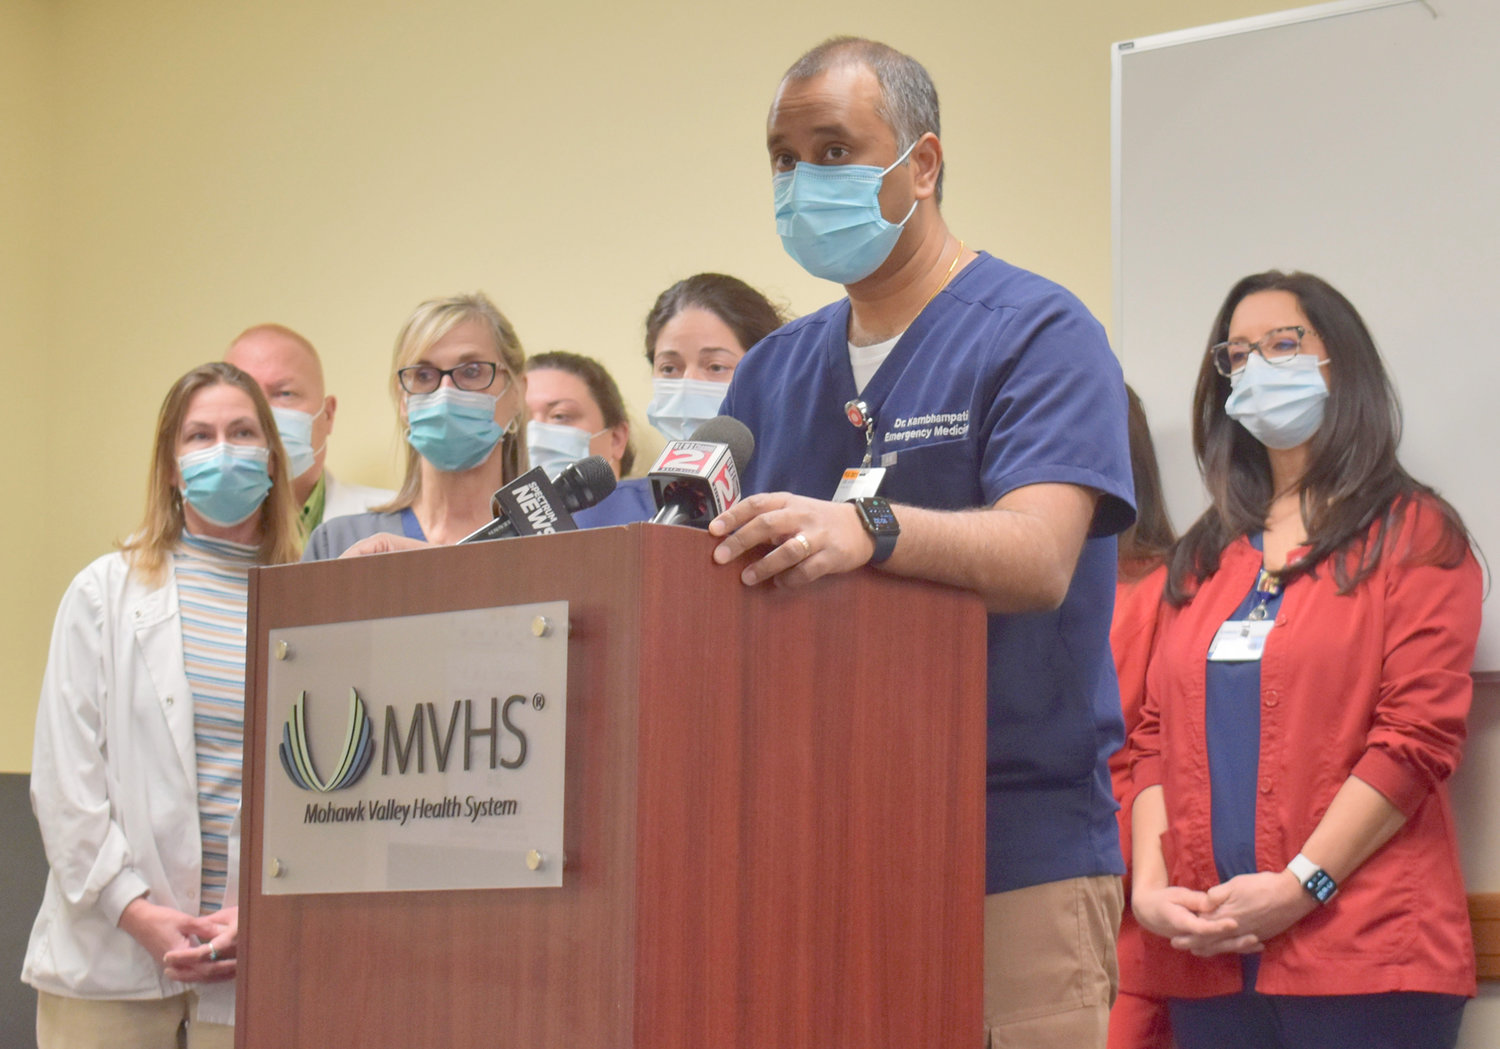 PATIENCE — Avinash Kambhampati, the vice chairperson of emergency medicine at the Mohawk Valley Health System, is flanked by MVHS nursing staff at a Wednesday news conference where the healthcare workers detailed escalating acts of patient aggression in the past year.